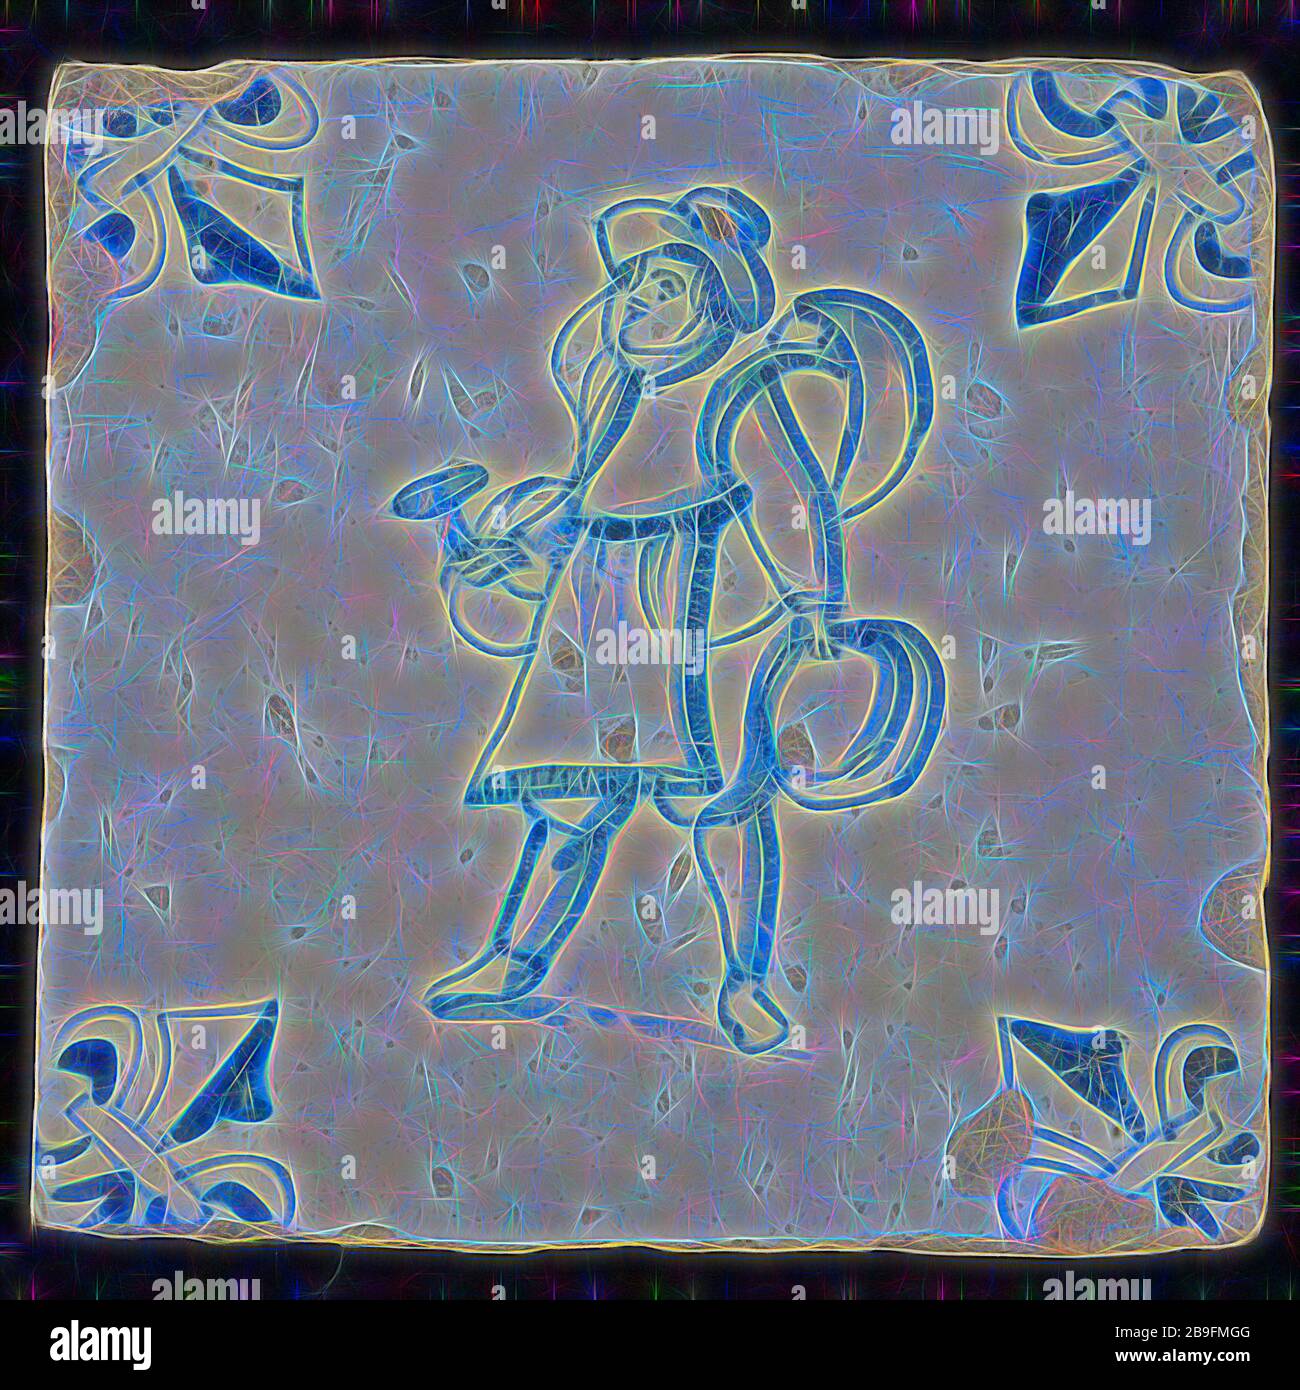 Figure tile, blue with brazier, man with hammer and various pots on the arms, corner motif lily, wall tile tile sculpture ceramic earthenware glaze, baked 2x glazed painted copper bearing Stock Photo